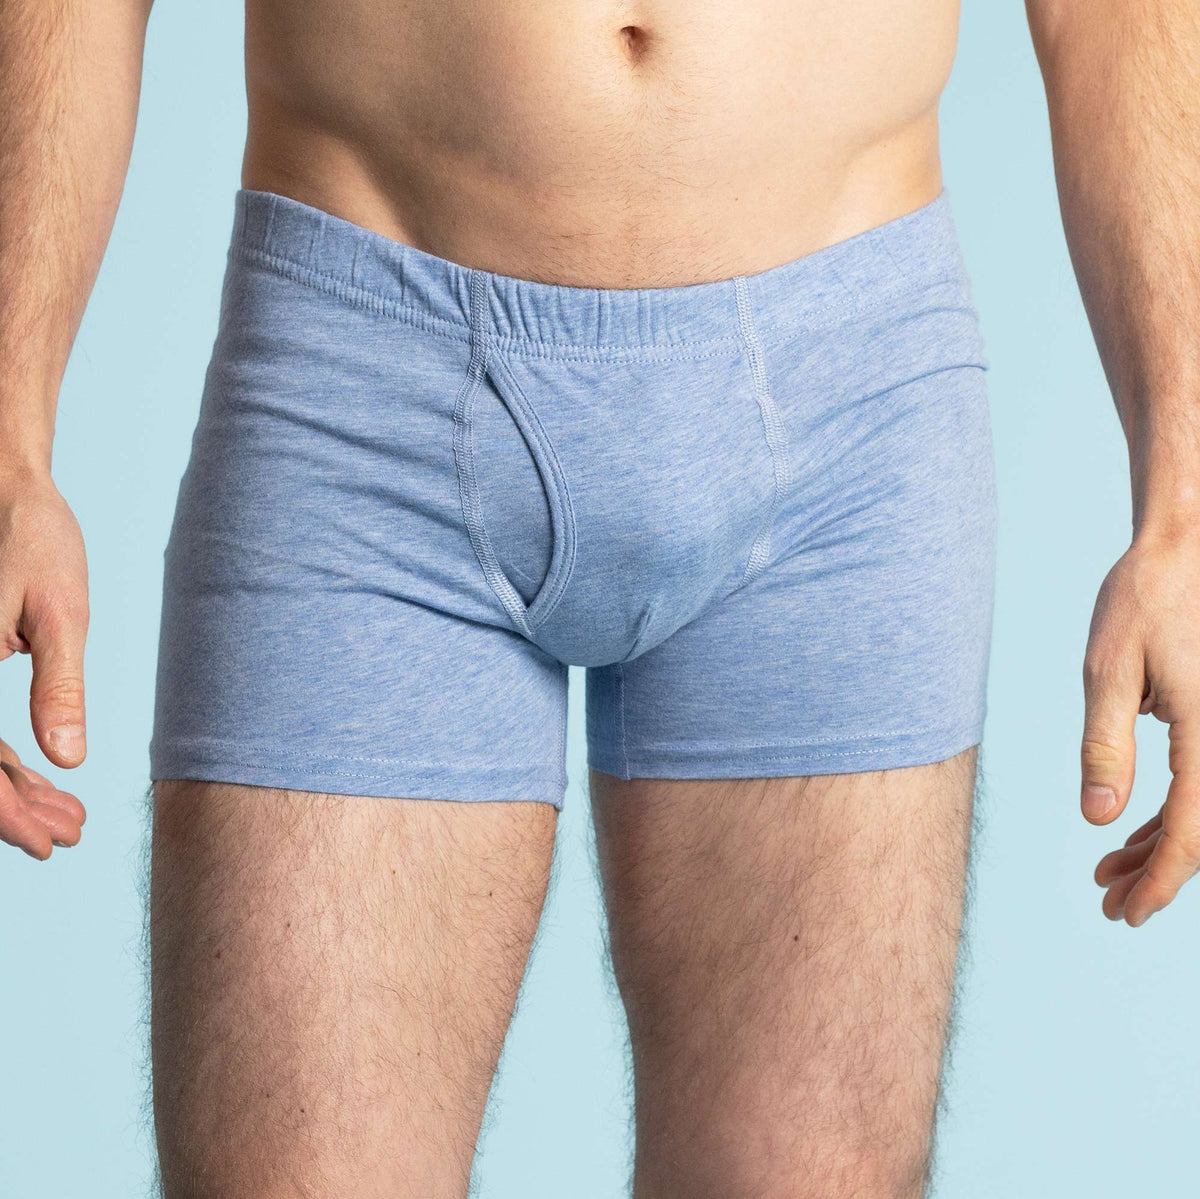 Organic Cotton Underwear - Made With All Natural Fibers!